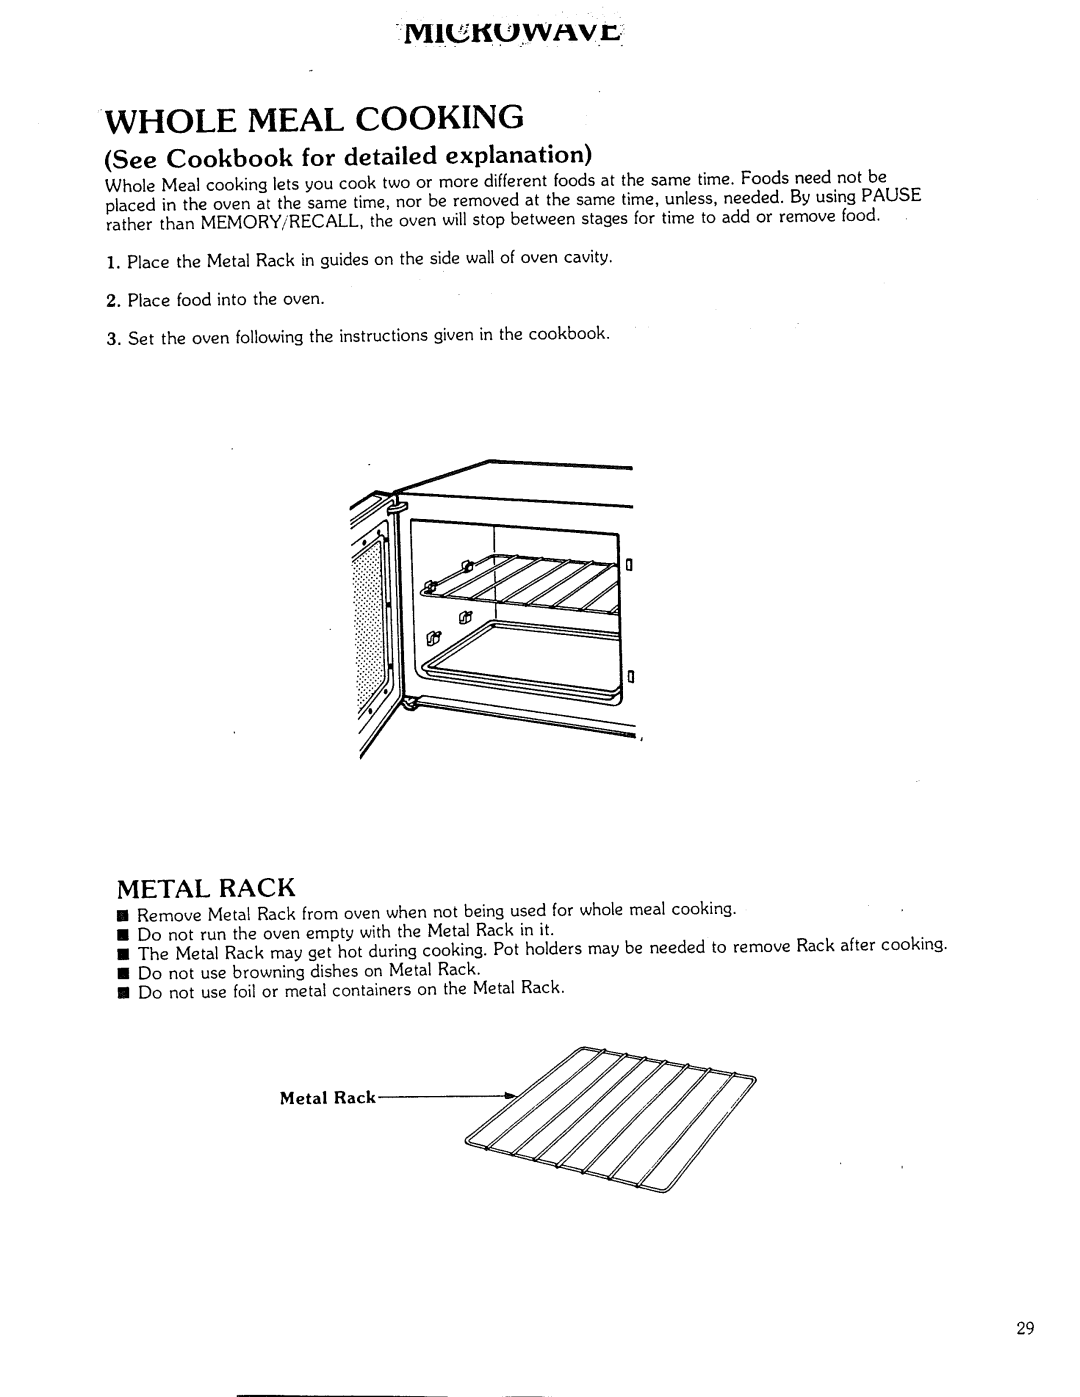 Kenmore Microwave Oven manual l KUW, vr, Whole Meal Cooking, See Cookbook for detailed explanation, Metal Rack 